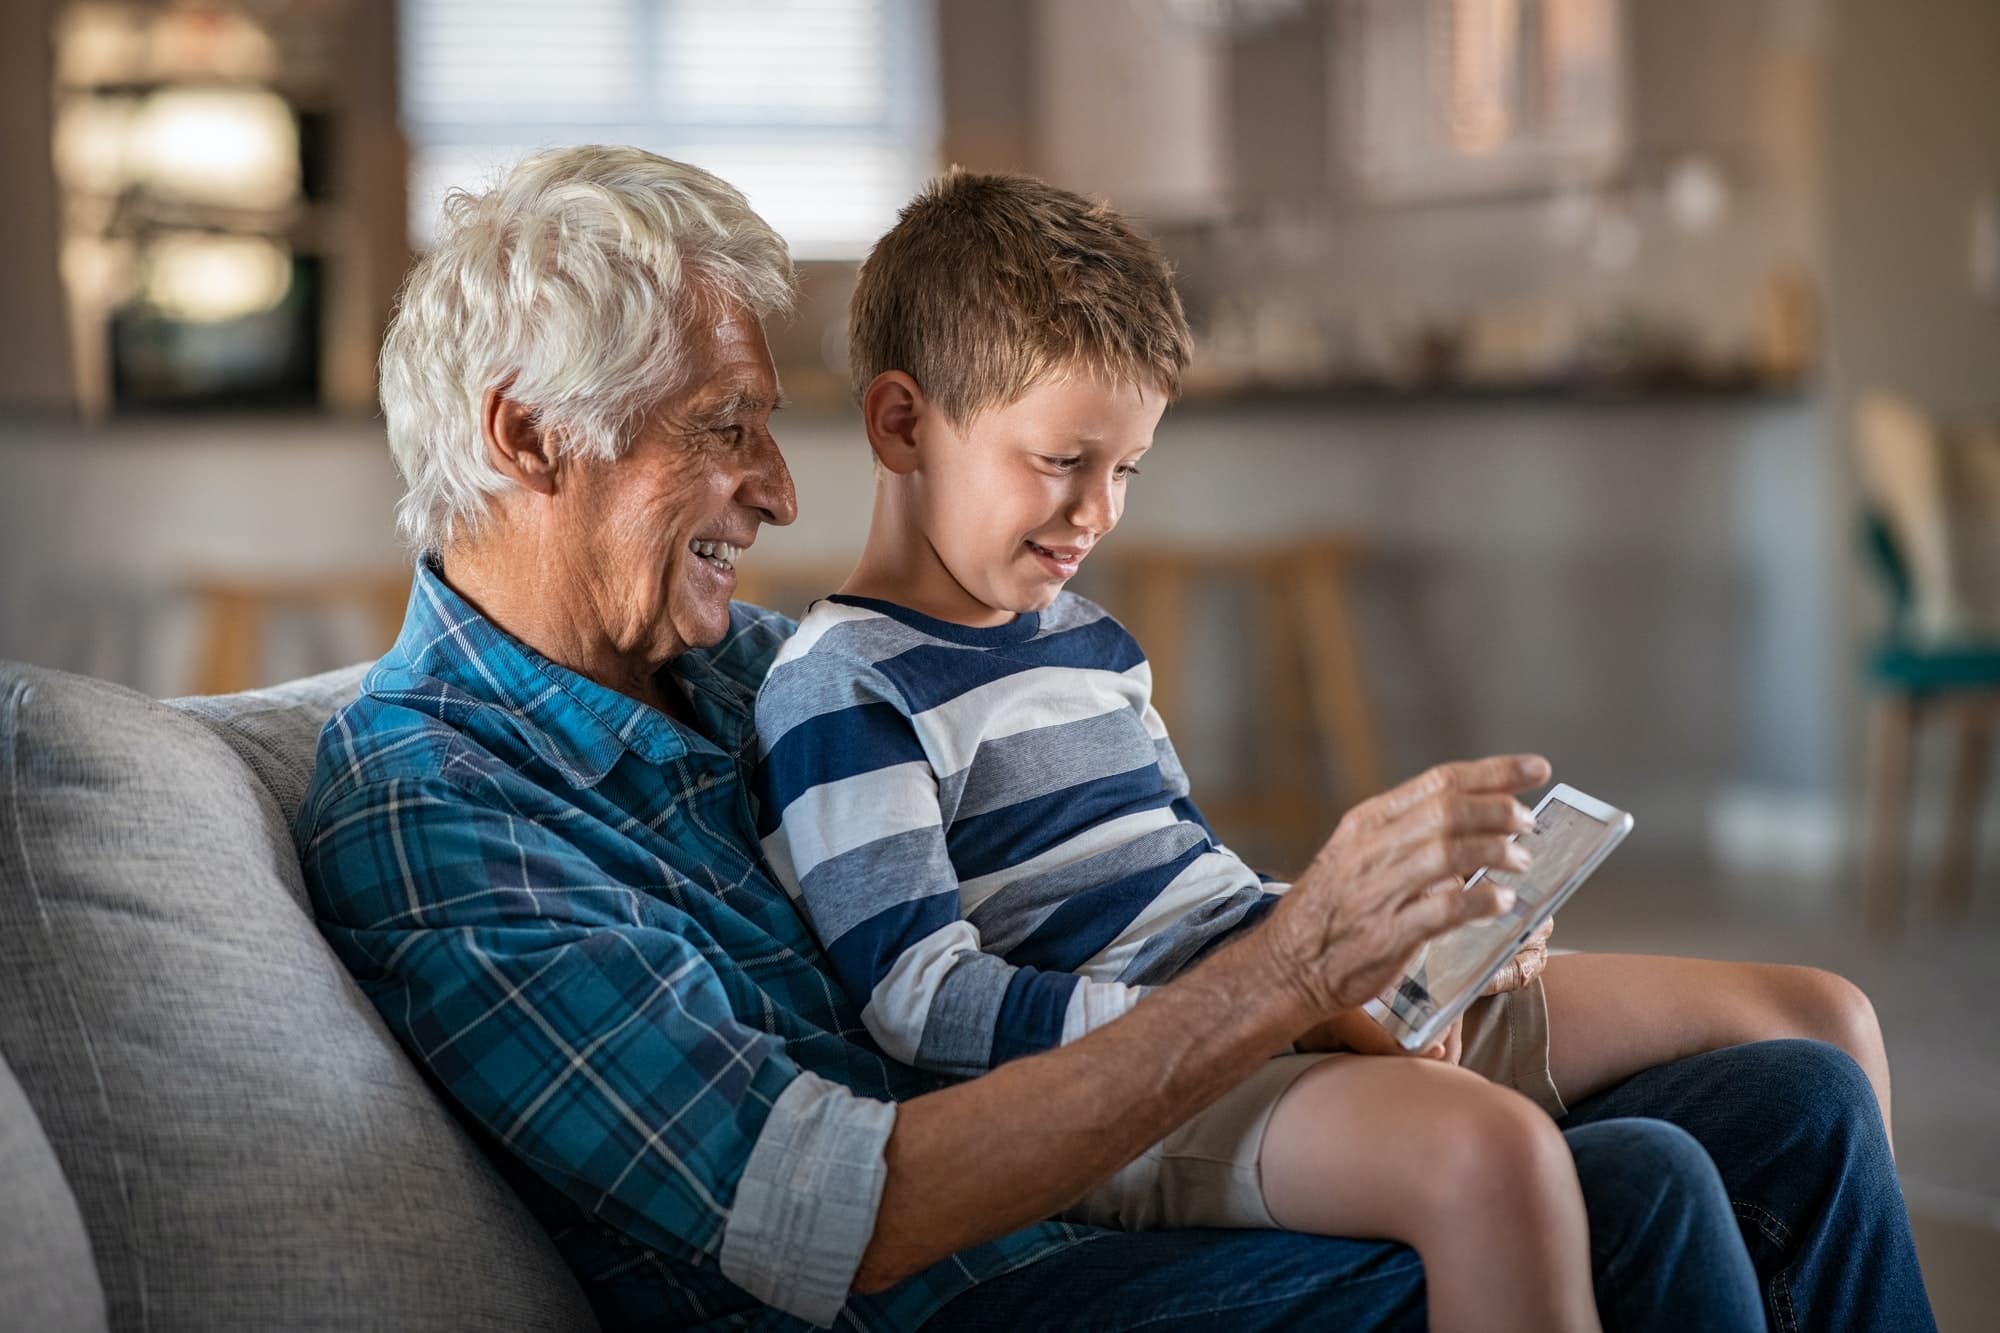 Use annuities to give your grandkids birthday gifts from your grave